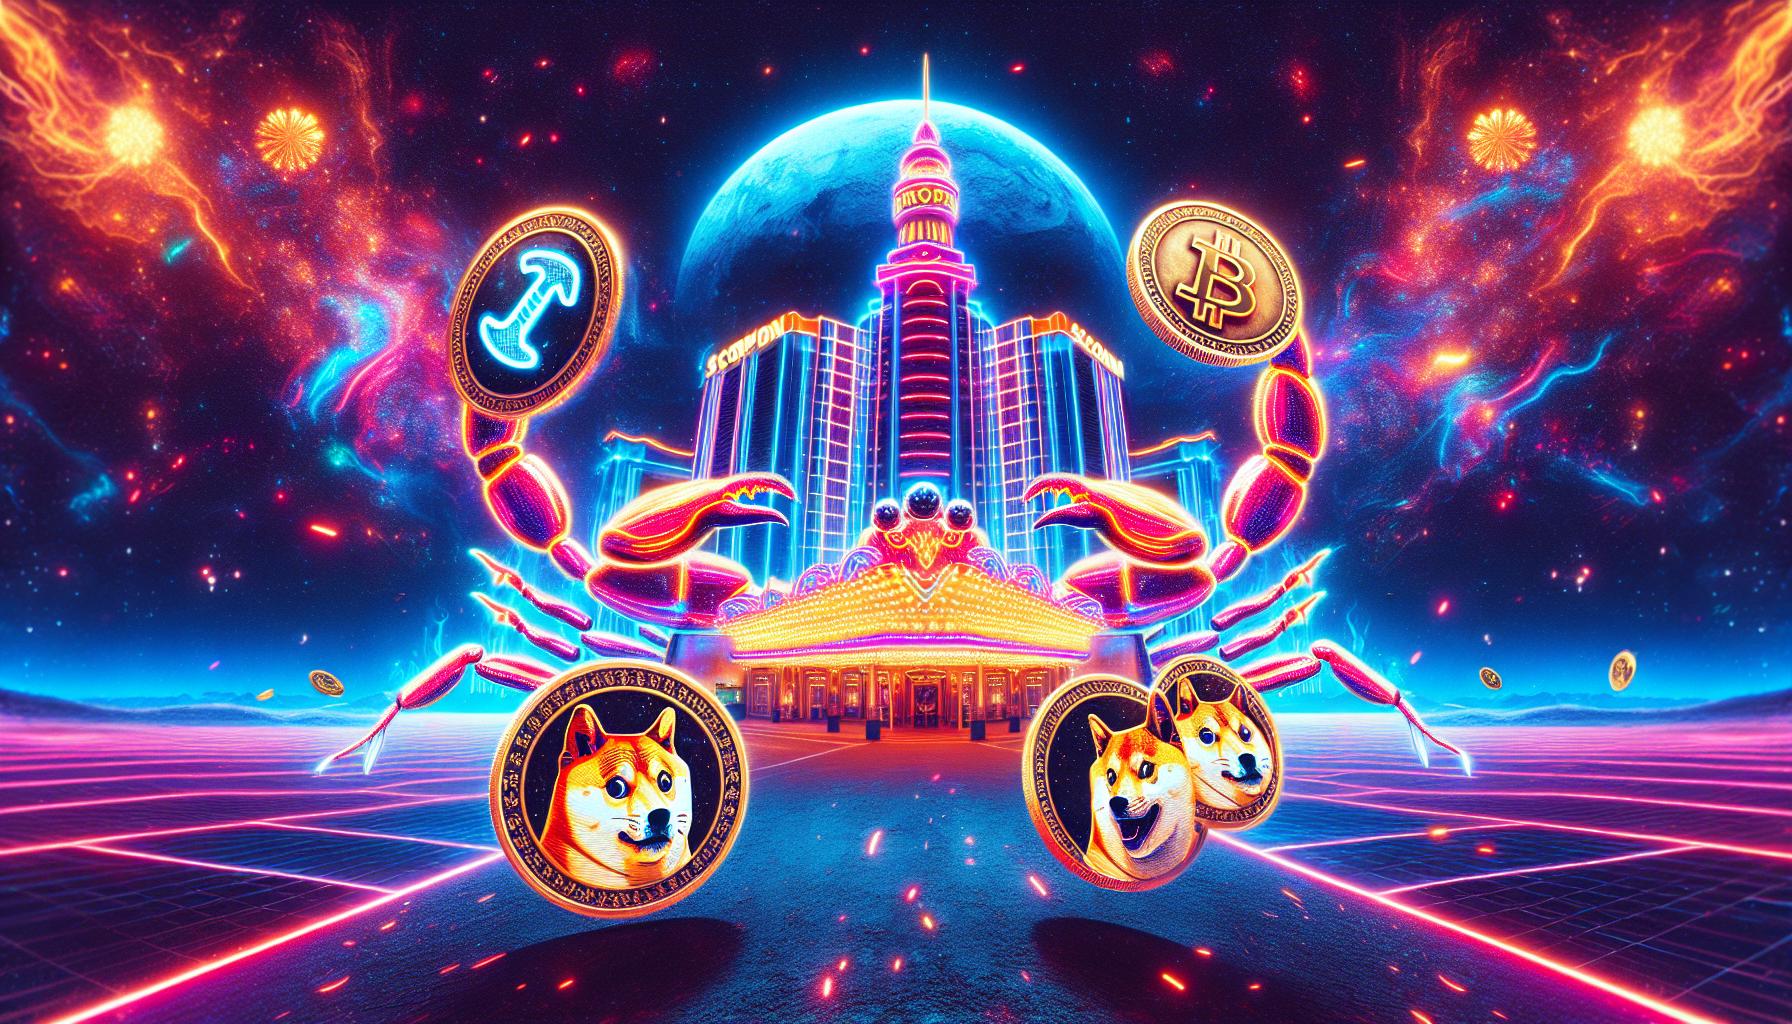 Scorpion Casino: Does It Outshine Dogecoin and Shiba Inu? | FinOracle